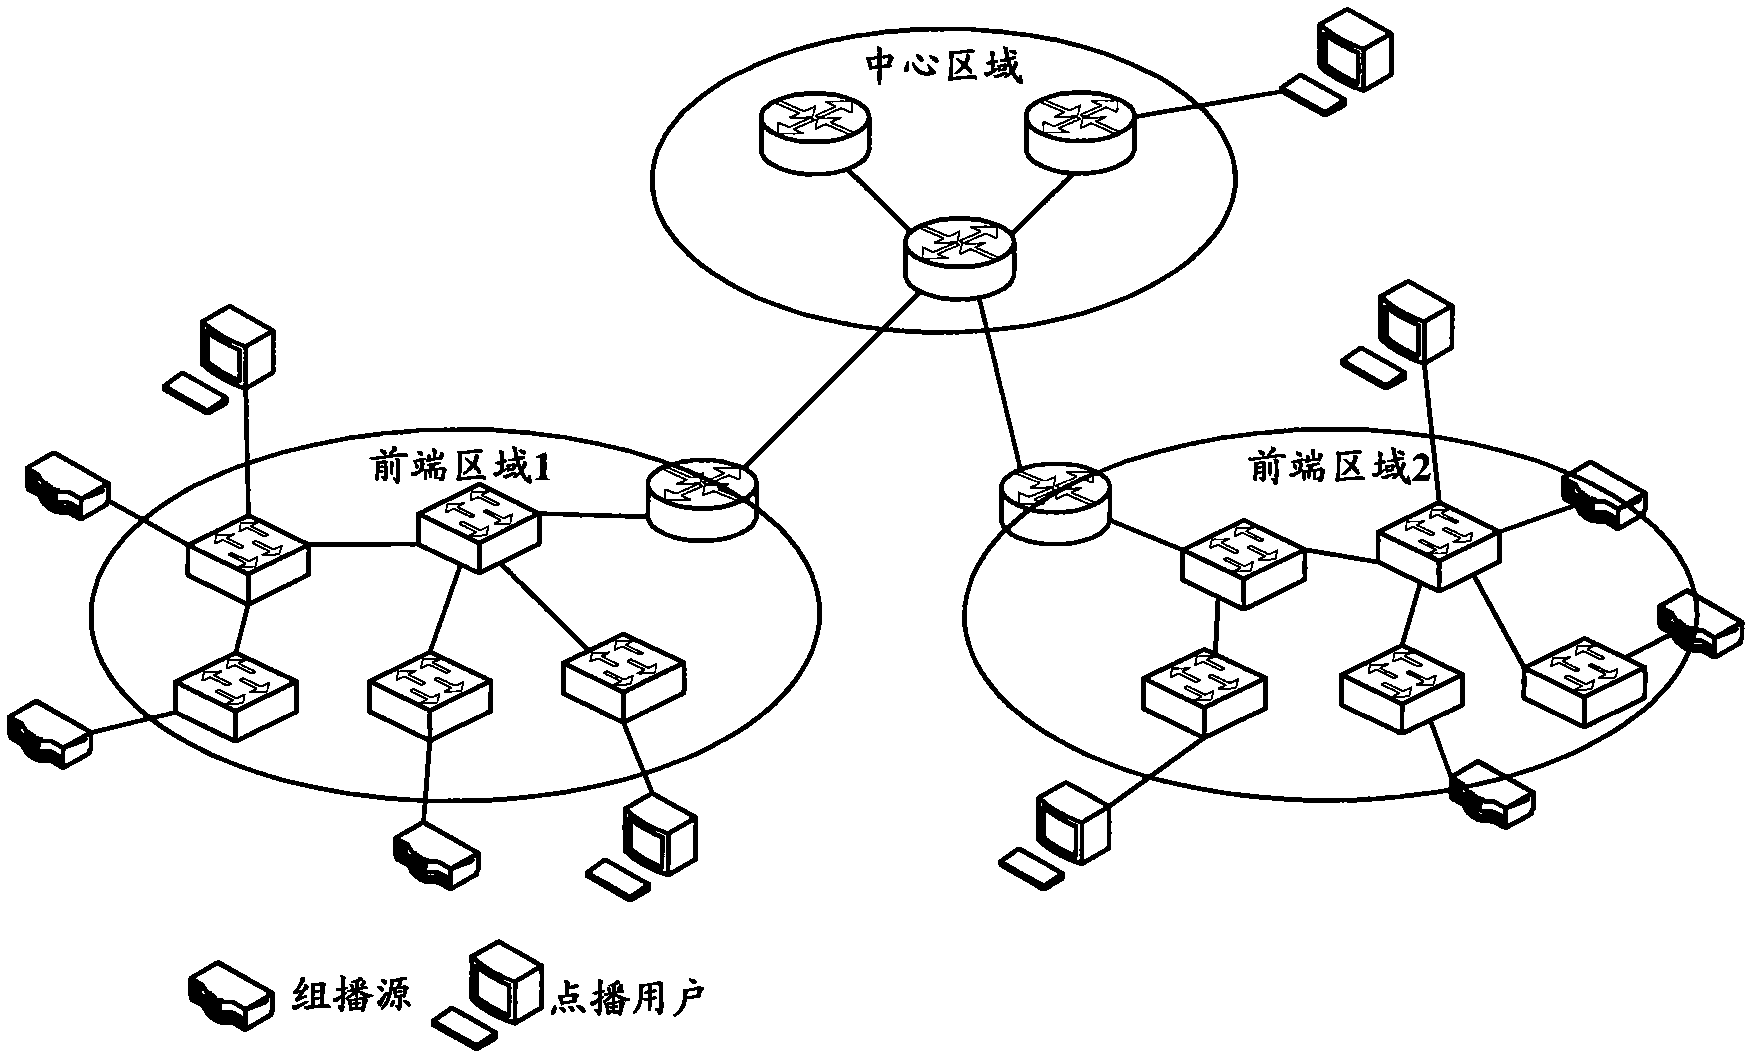 Multicast management method and two-layer equipment